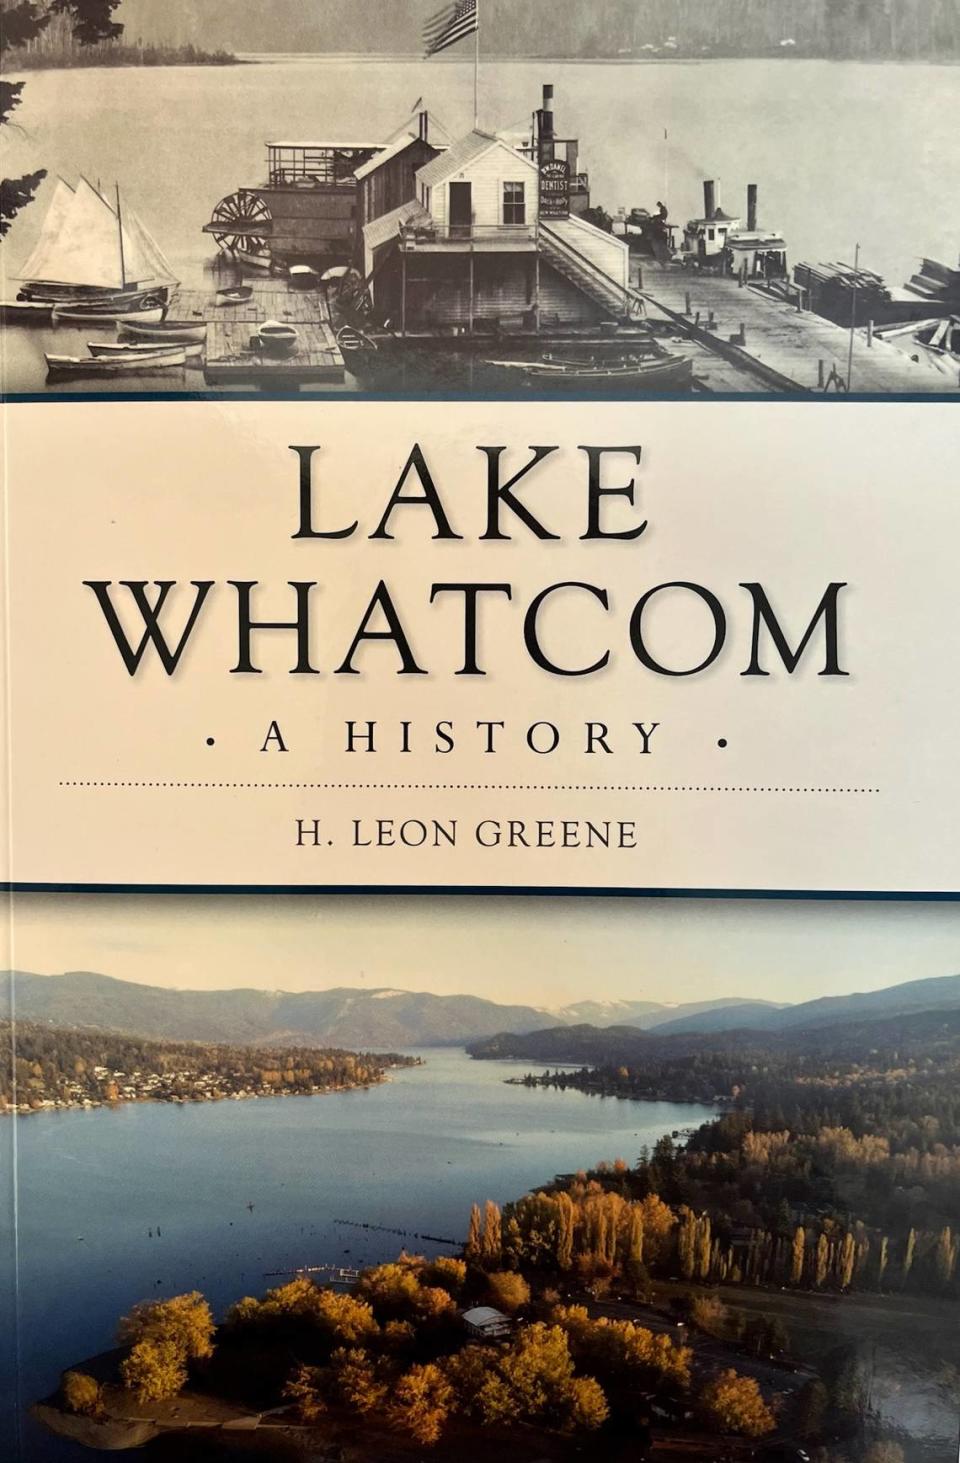 Local author H. Leon Greene wrote a book detailing the history of Lake Whatcom.